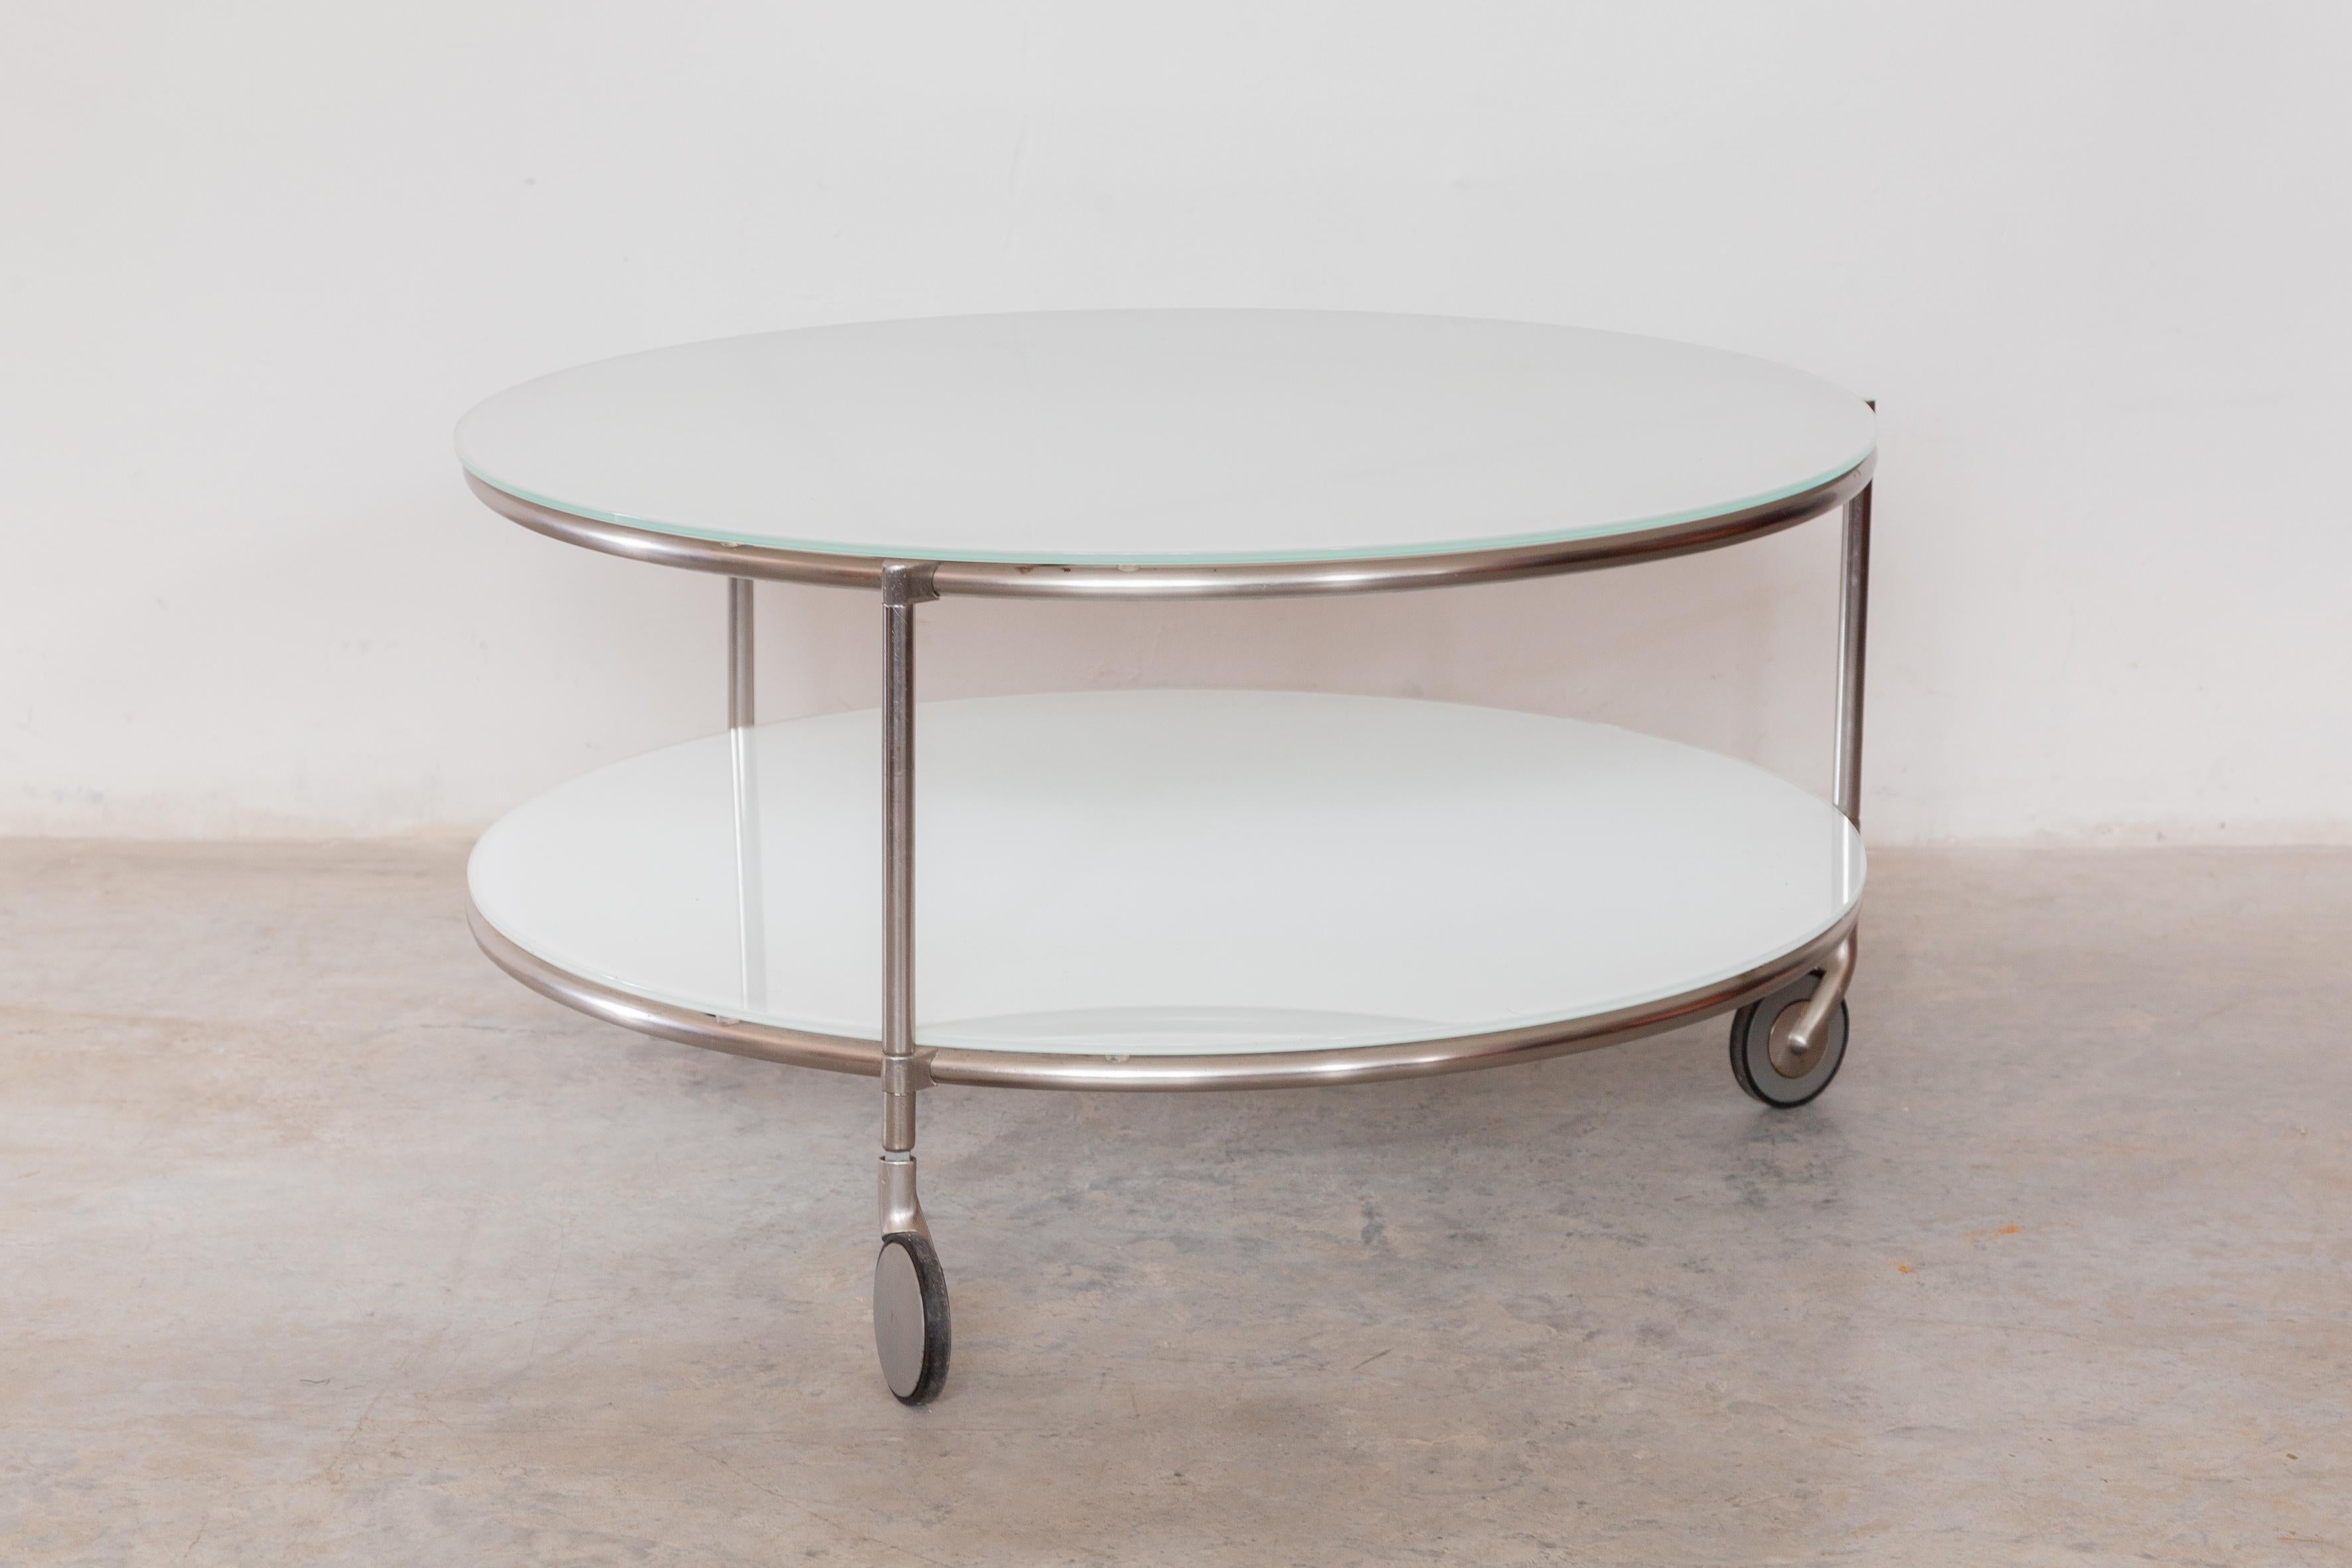 Geometry and lightness these are the principles behind the round white opal glass coffee table, a design that revolves around the concepts of equilibrium and instability. This is a low-lying table that can be disassembled. The structure is made of